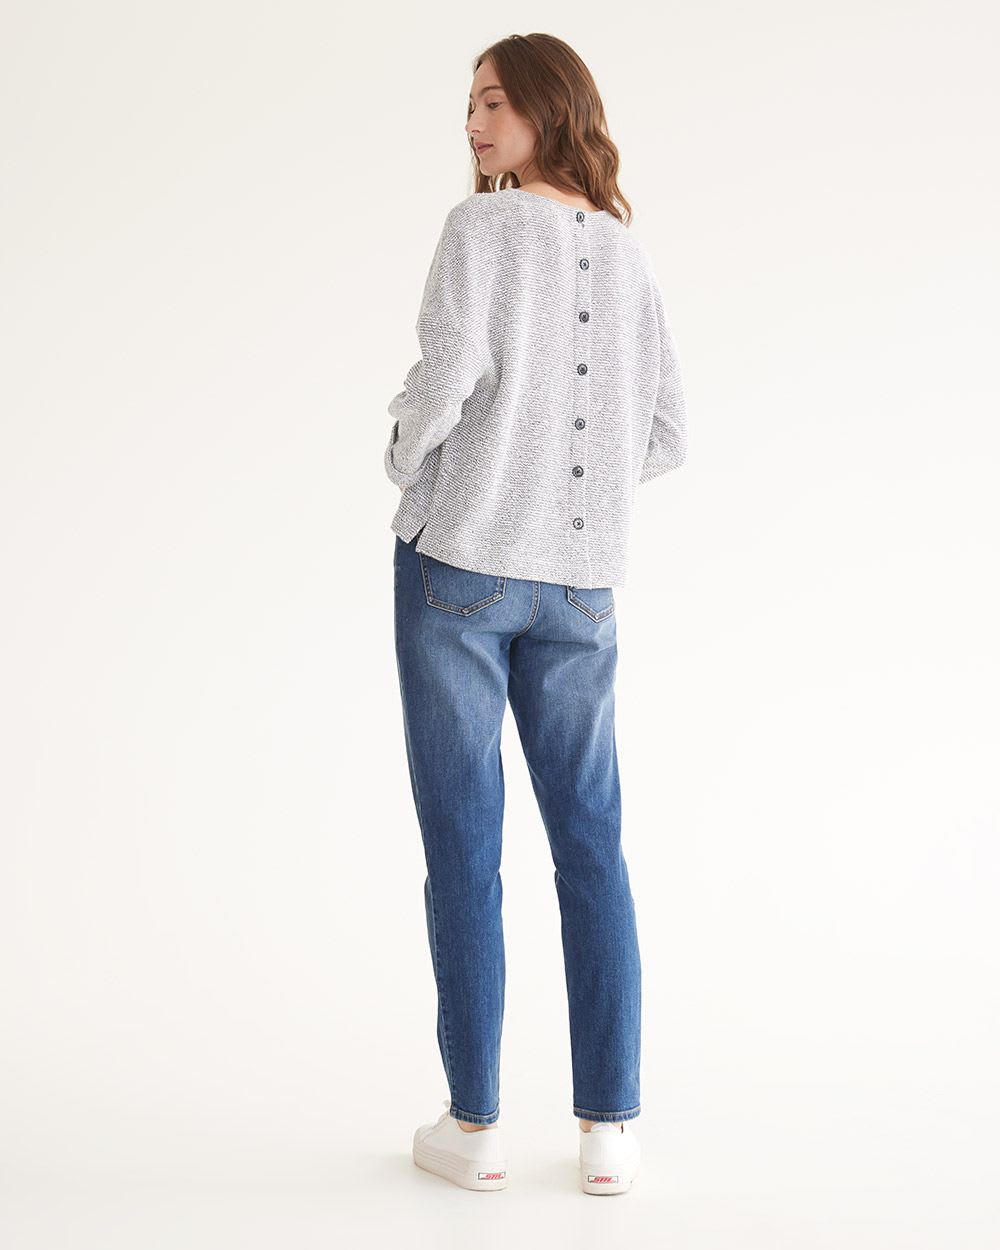 3/4-Sleeve Textured Top with Buttoned Back